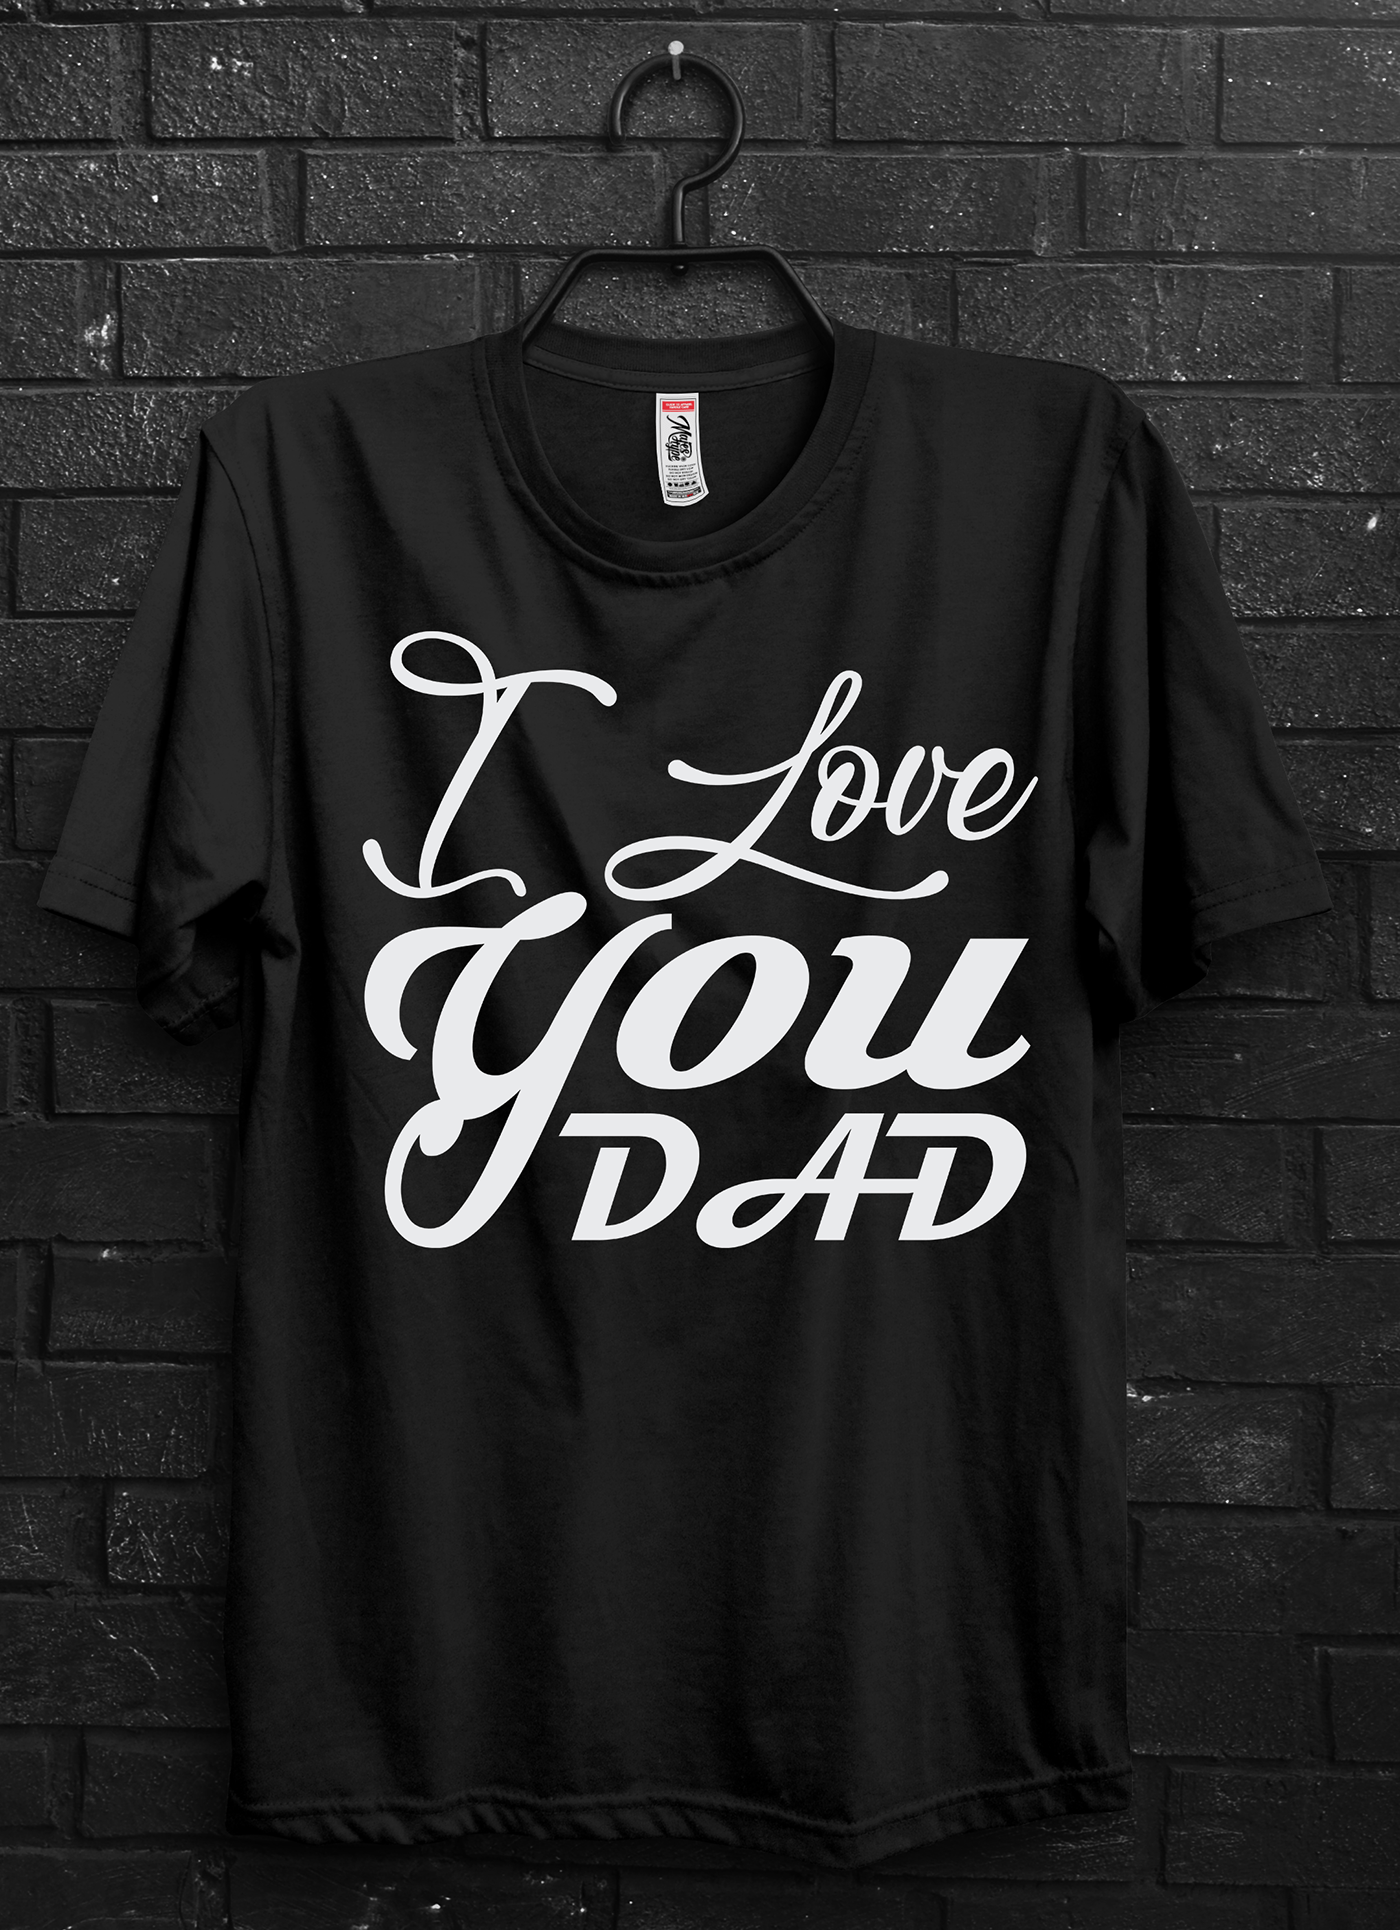 father day tshirt father tshirt design fathers day 2020 Fathers Day Gifts fathers day inspirational fathers day quotes fathers funny quotes T-shirt Design Tshirt typography tshirt design